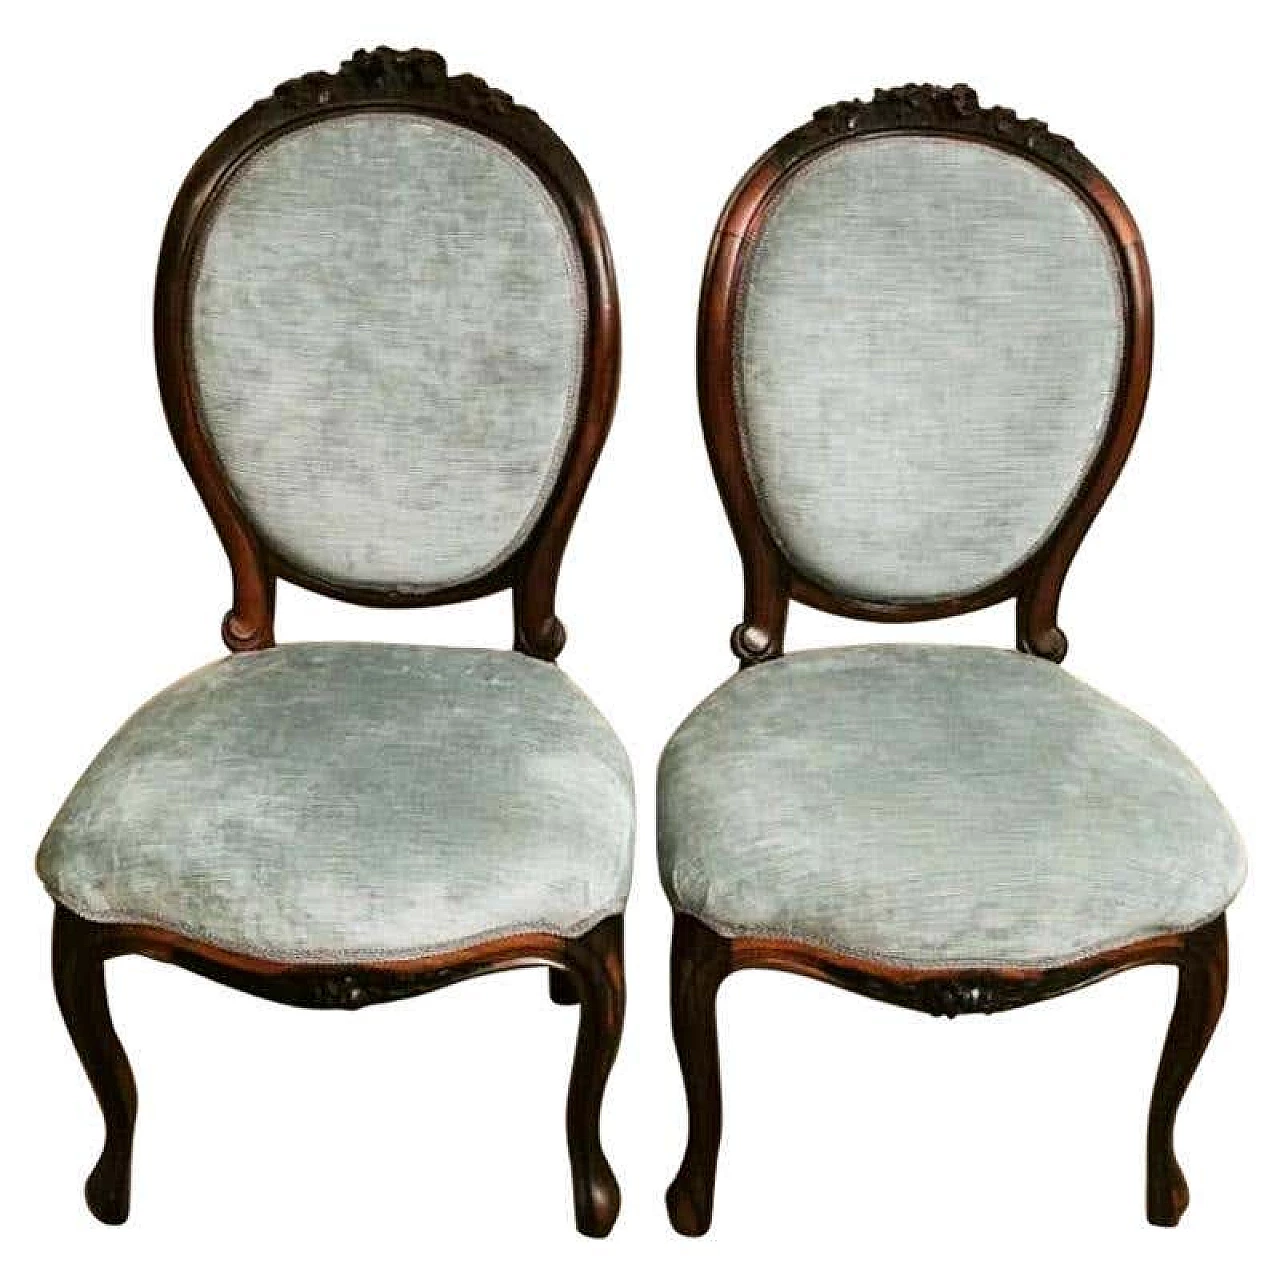 Pair of Napoleon III bedroom chairs in carved mahogany, 19th century 1189000